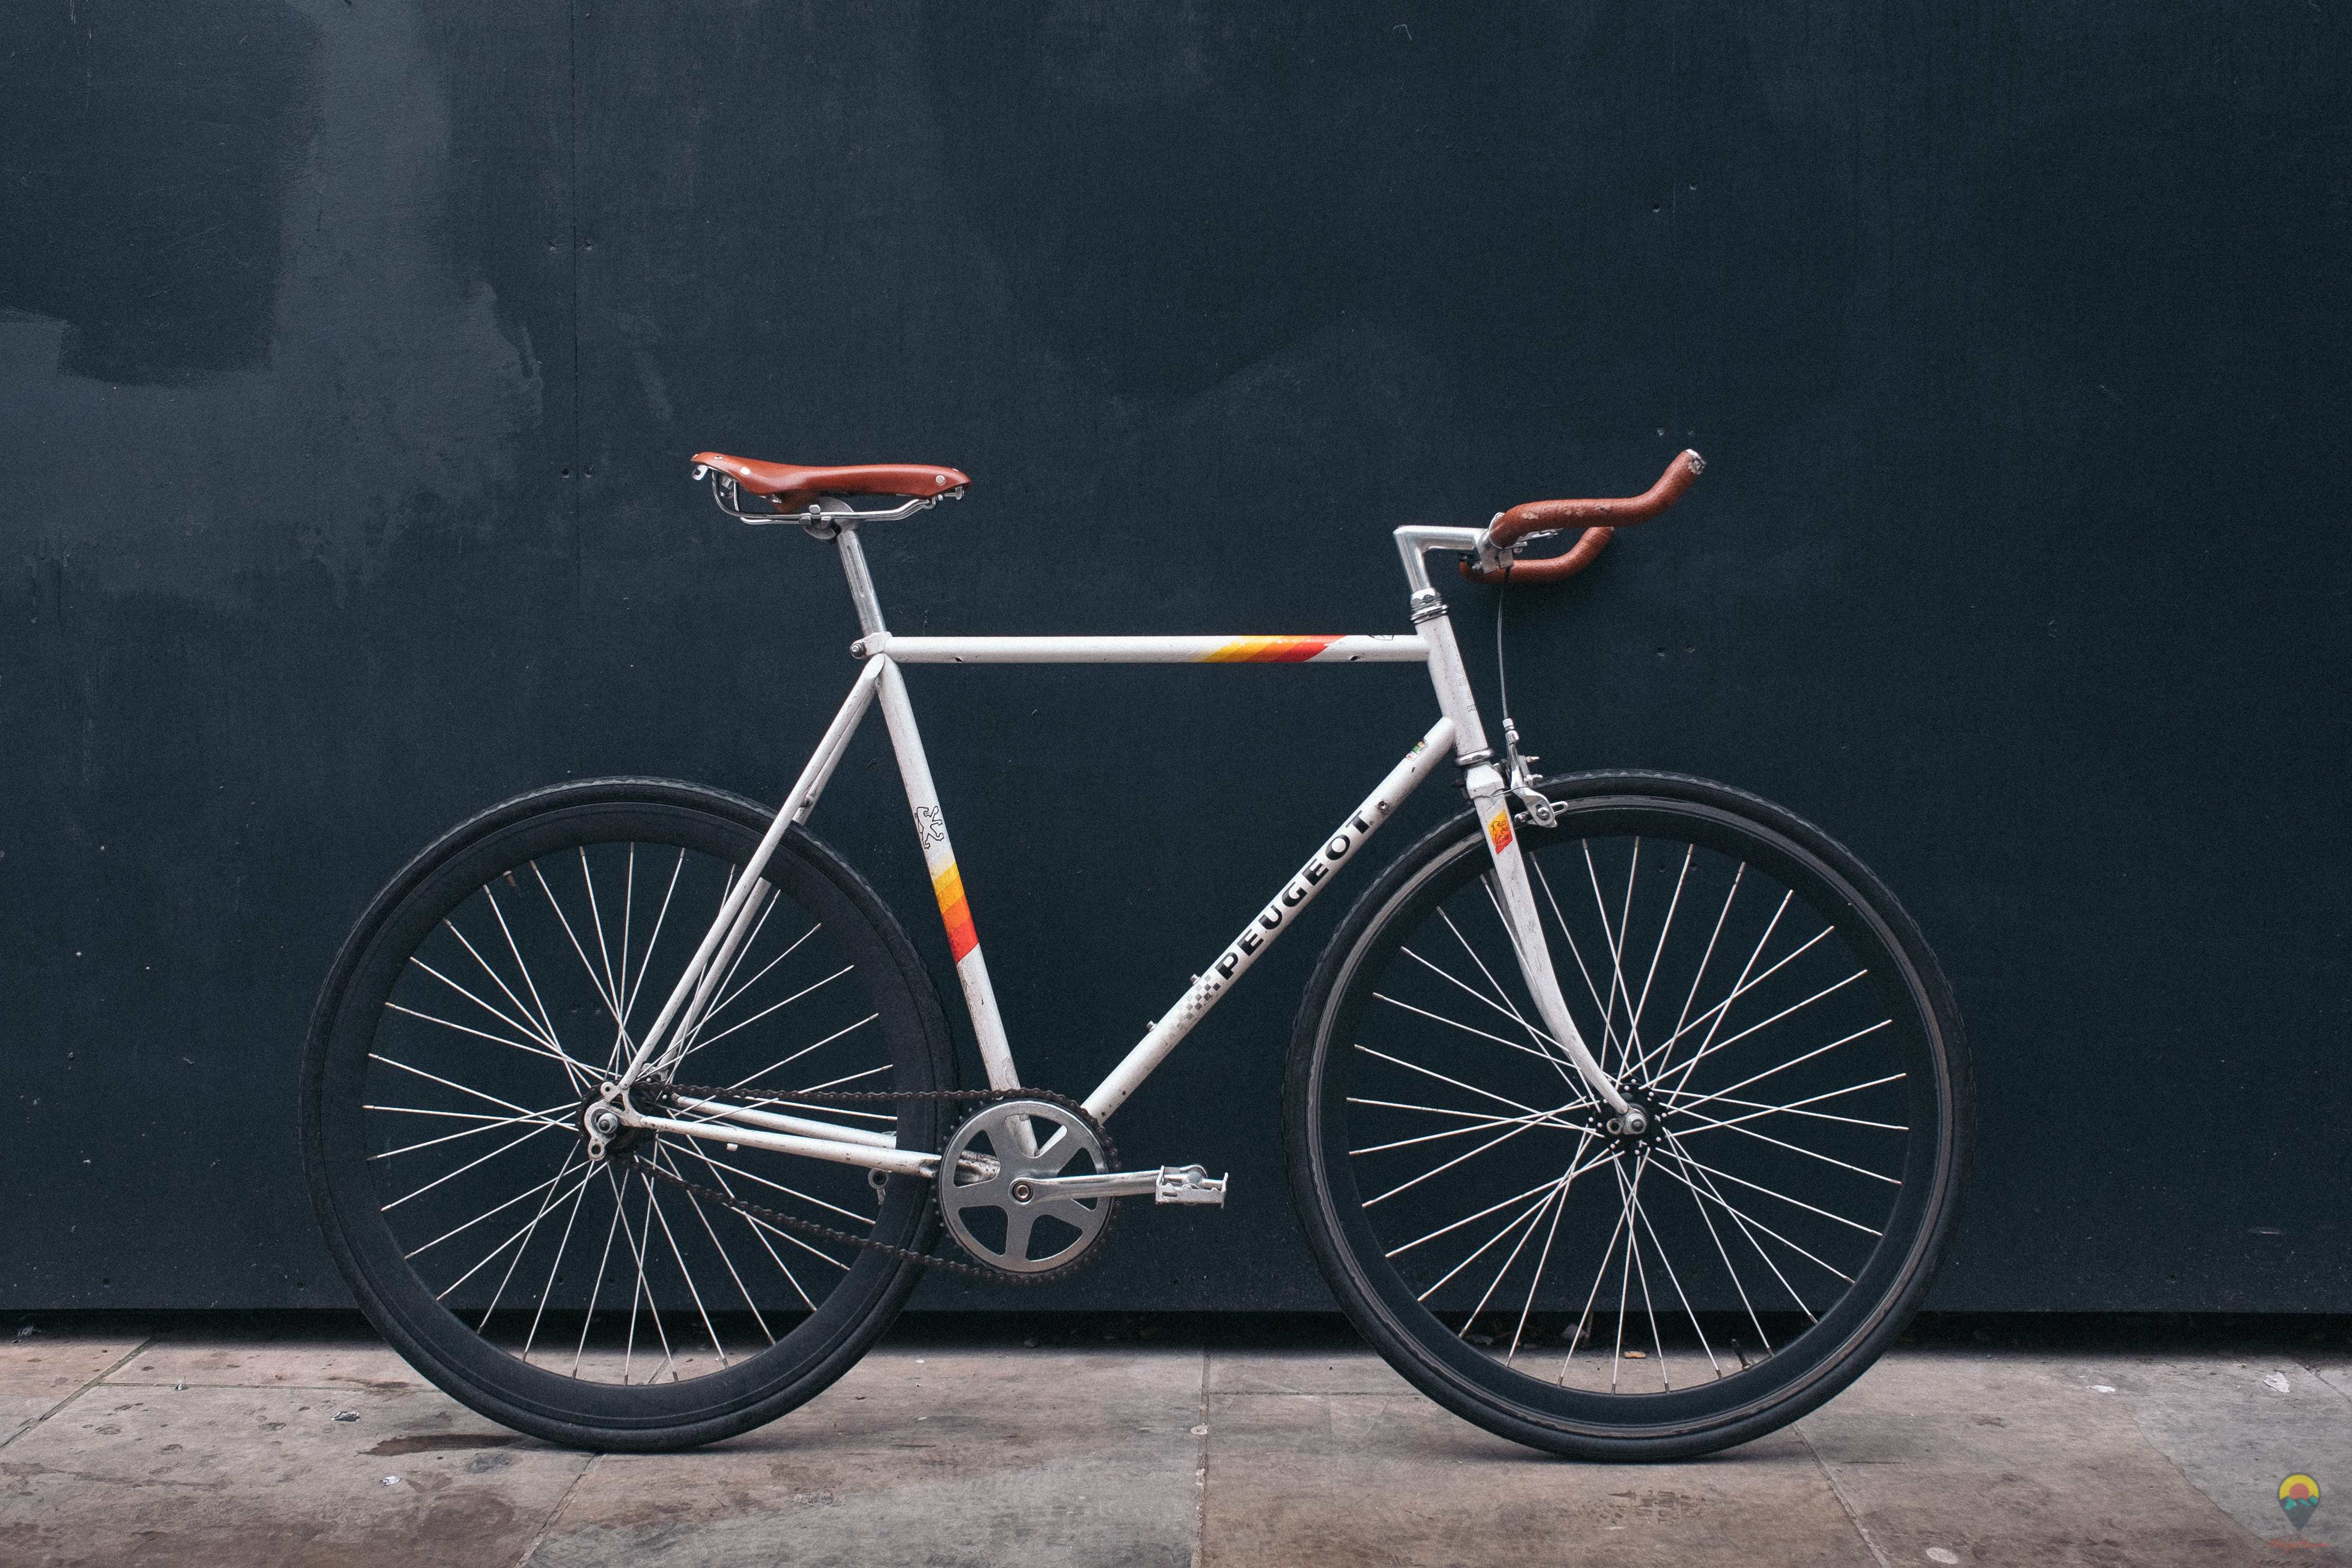 Fixie vs Single Speed, What's the Difference and Which One Is Best For You? Bike 101